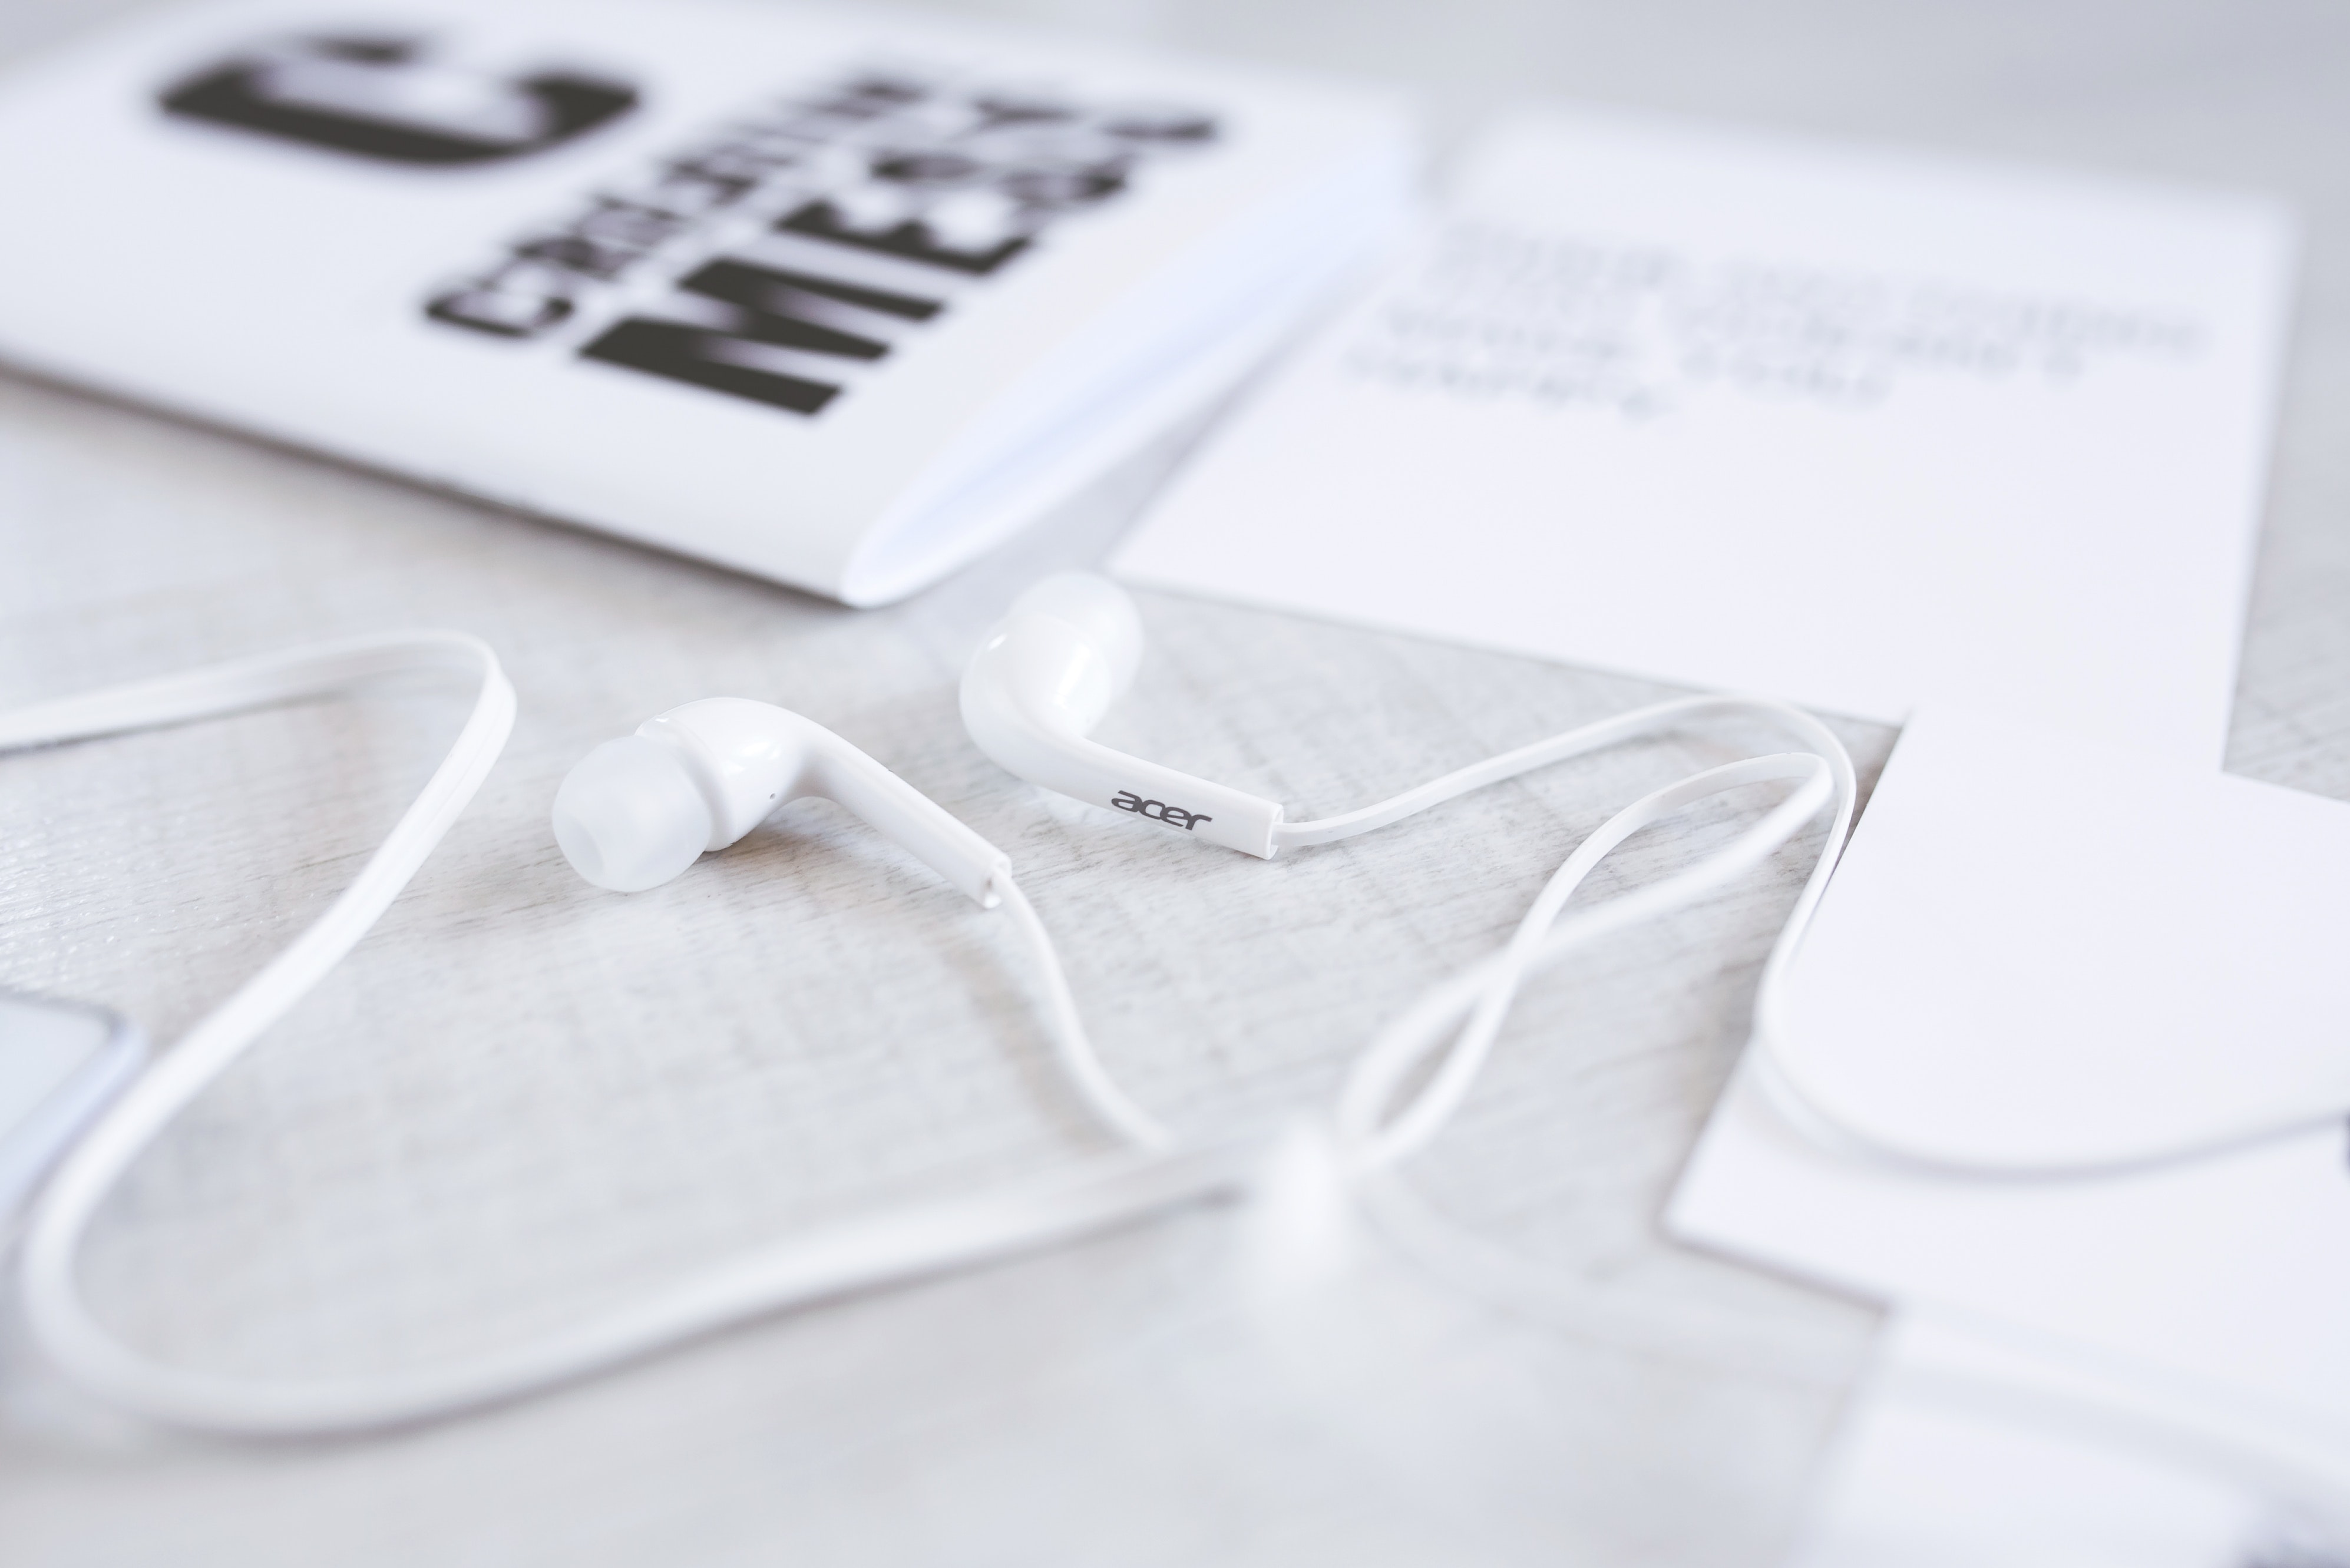 White and modern earphones on a desk photo